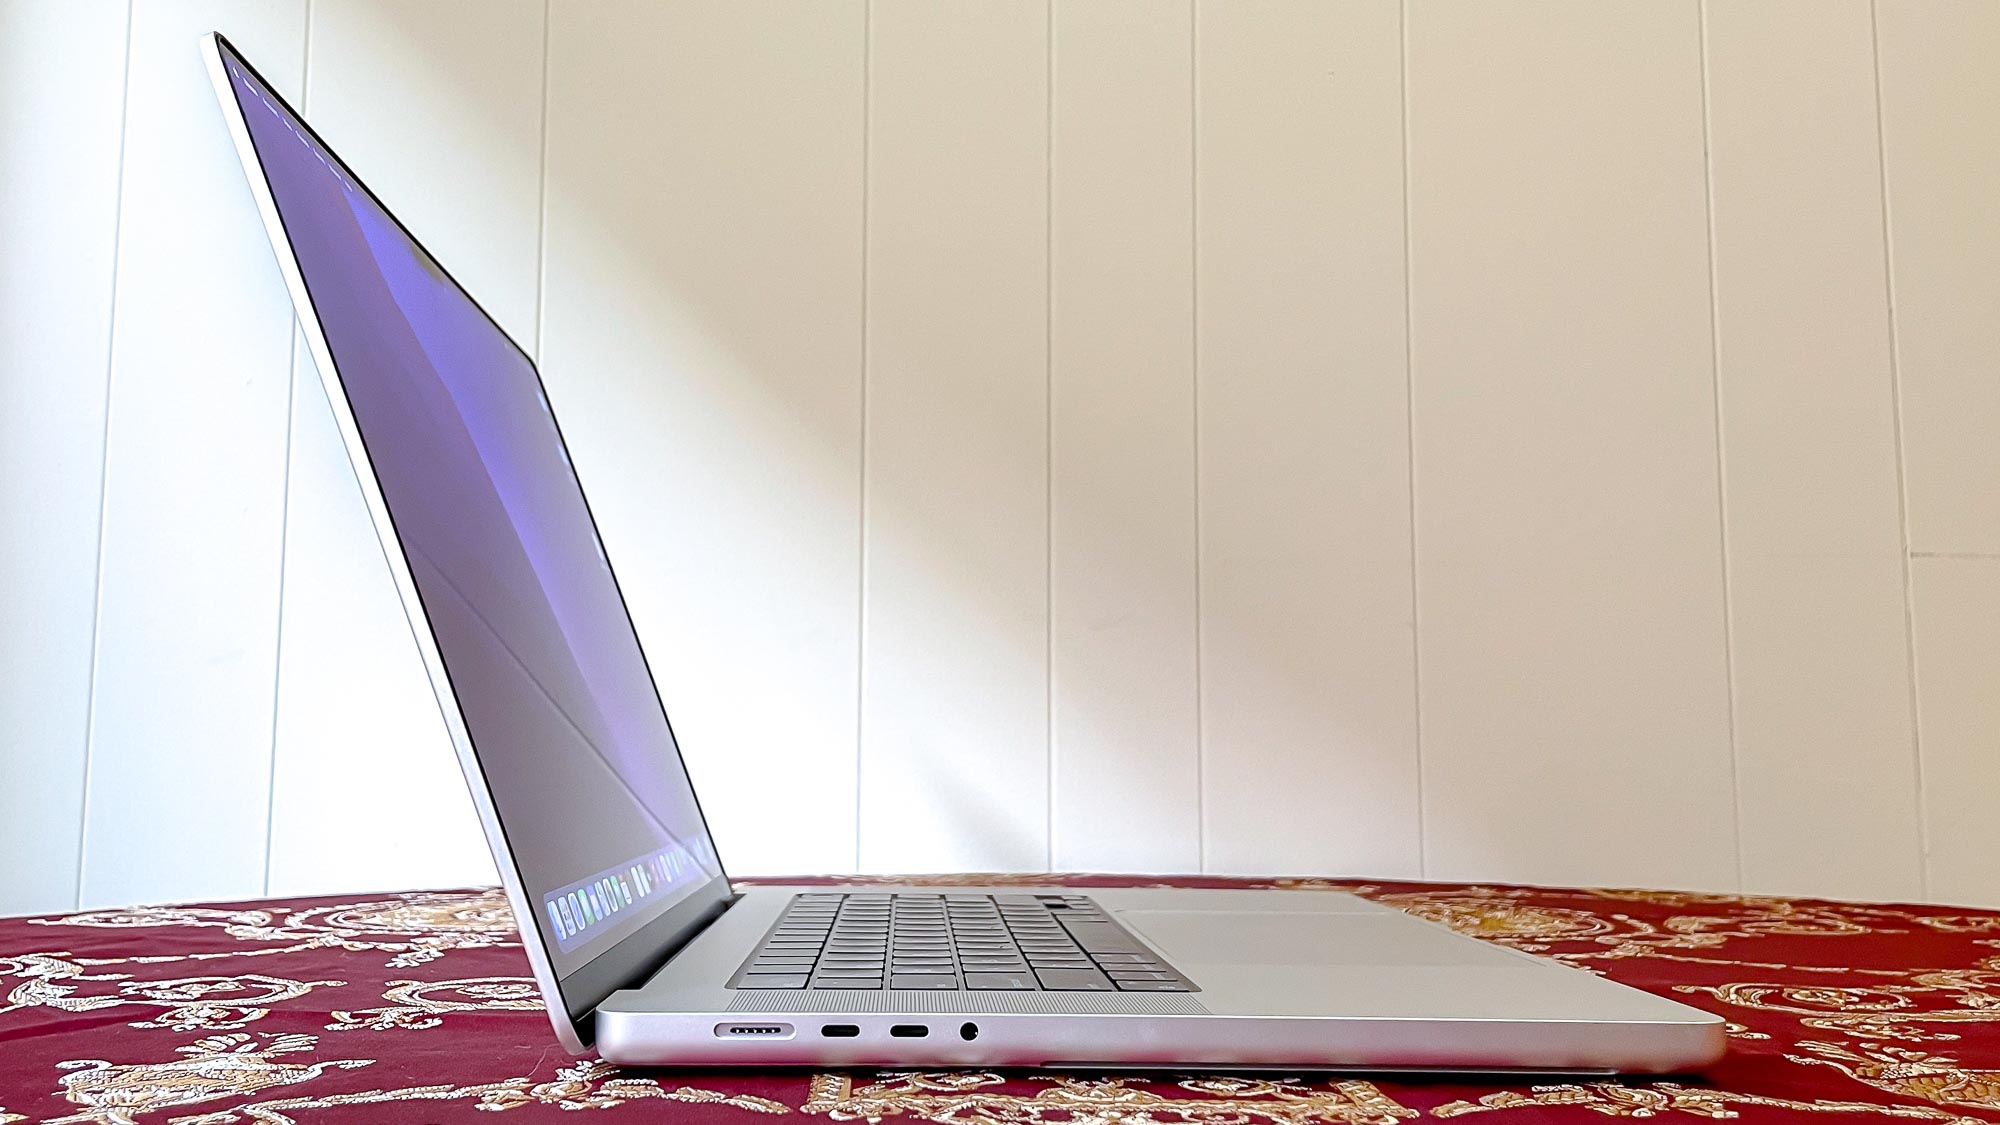 MacBook Pro 2021 (16-inch) on a table, left edge shown